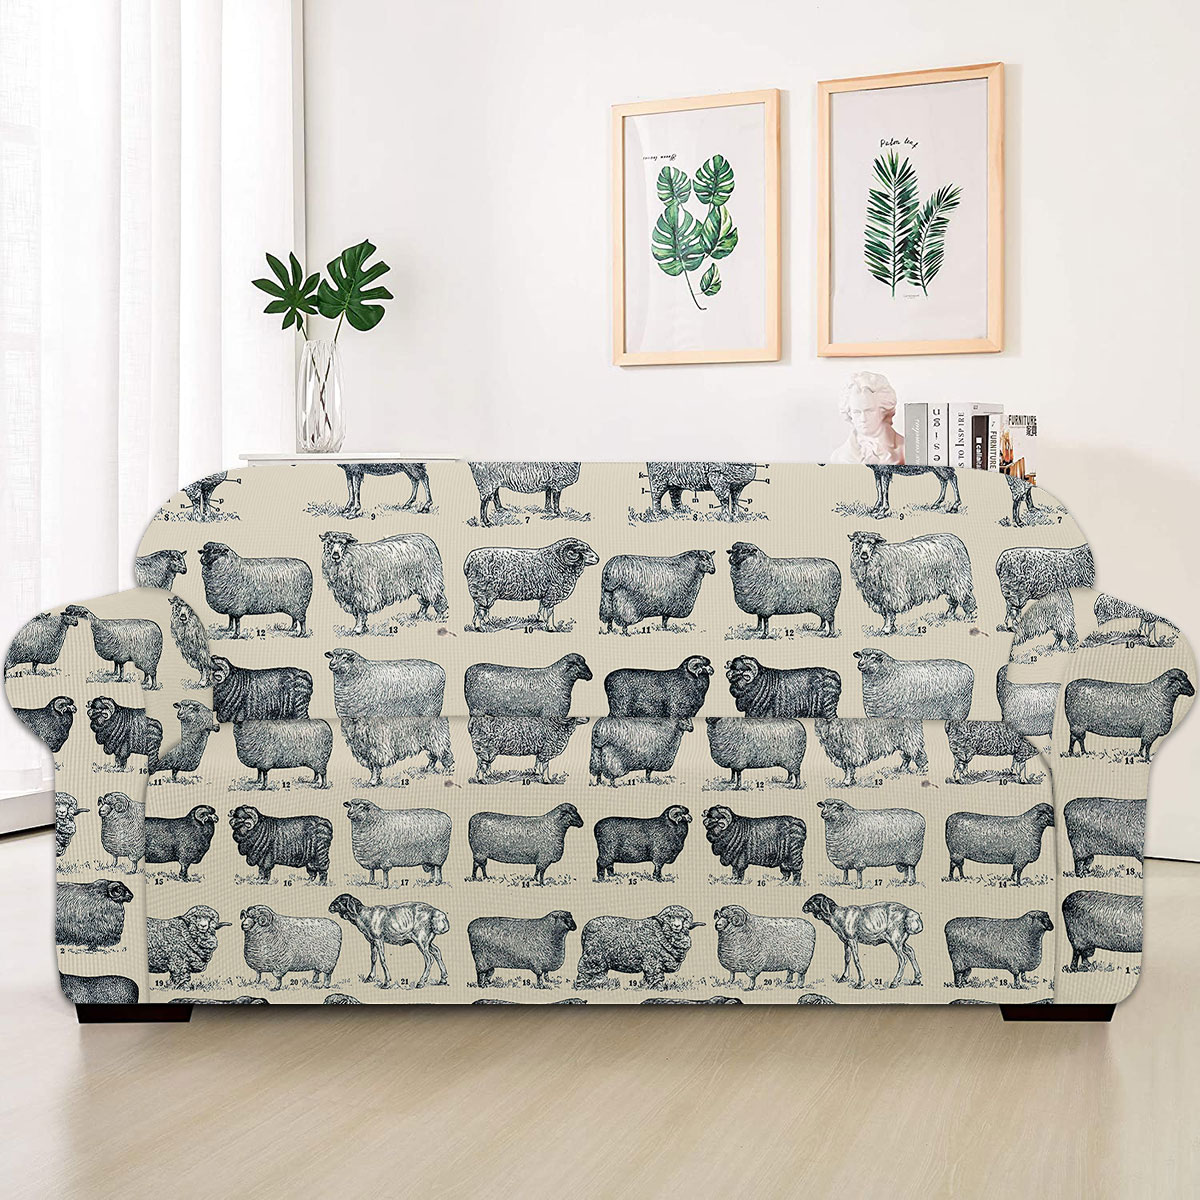 Sheep Breed Vintage Pattern Sofa Cover